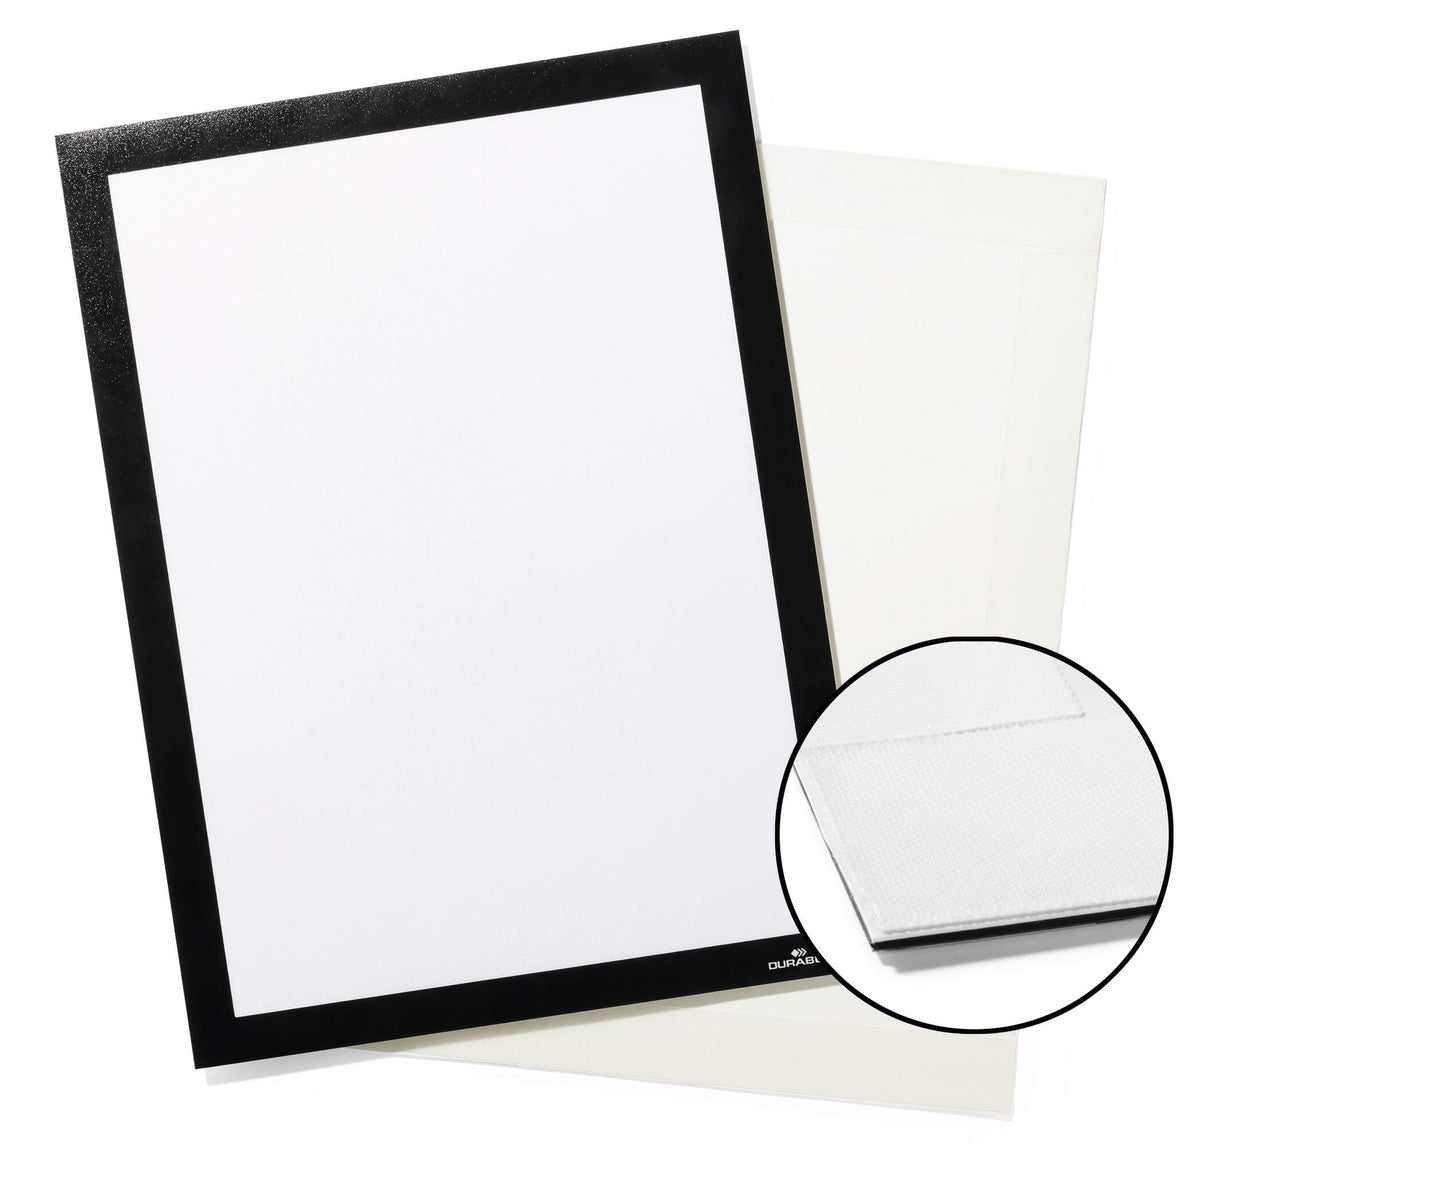 Durable DURAFRAME GRIP Fabric Adhesive Magnetic Signage Frame | A4